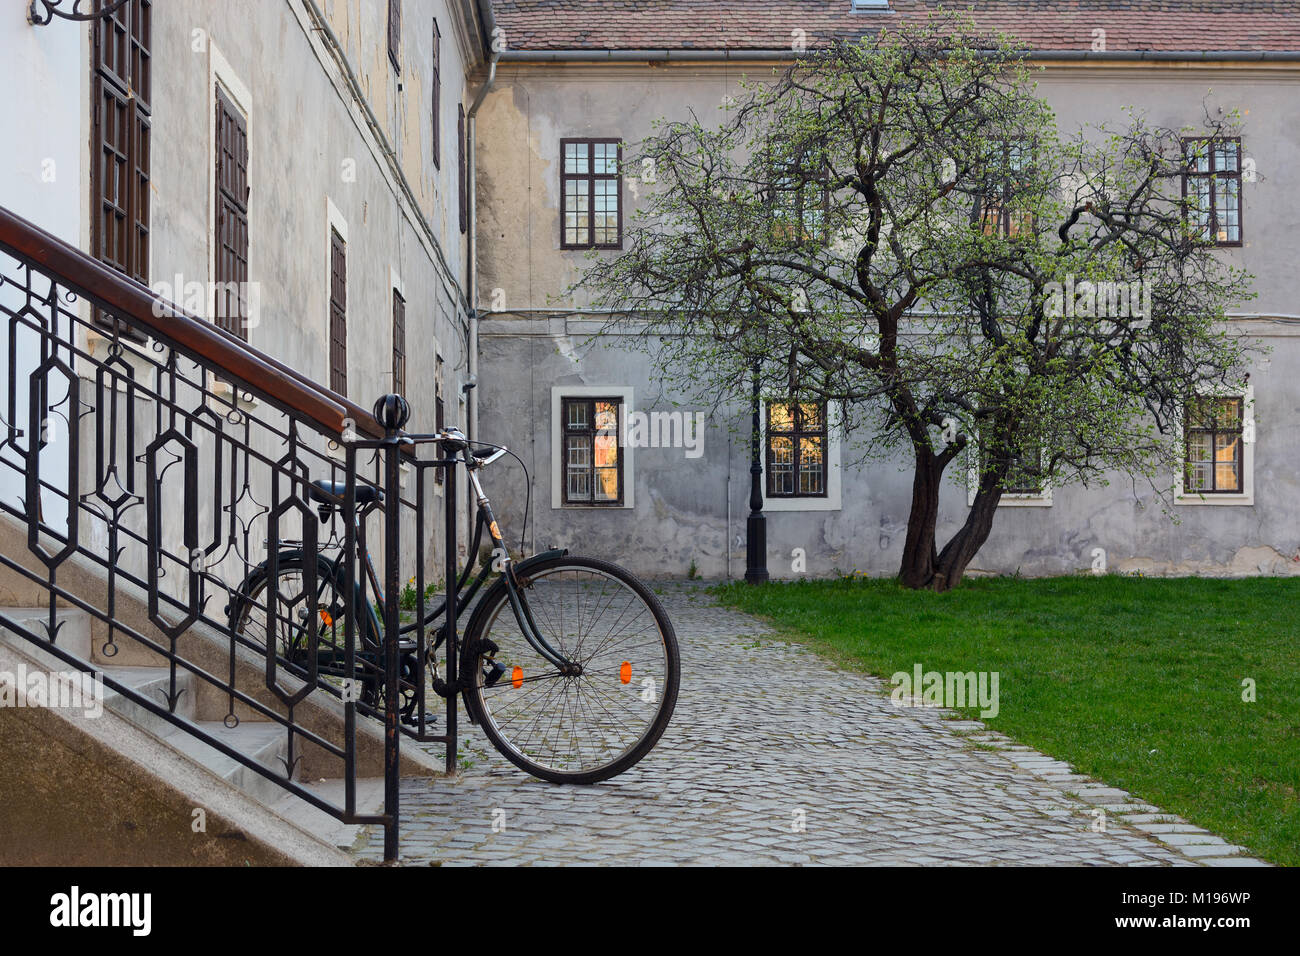 Bicycle in stone built-up historic area, lonely tree on green lawn Stock Photo